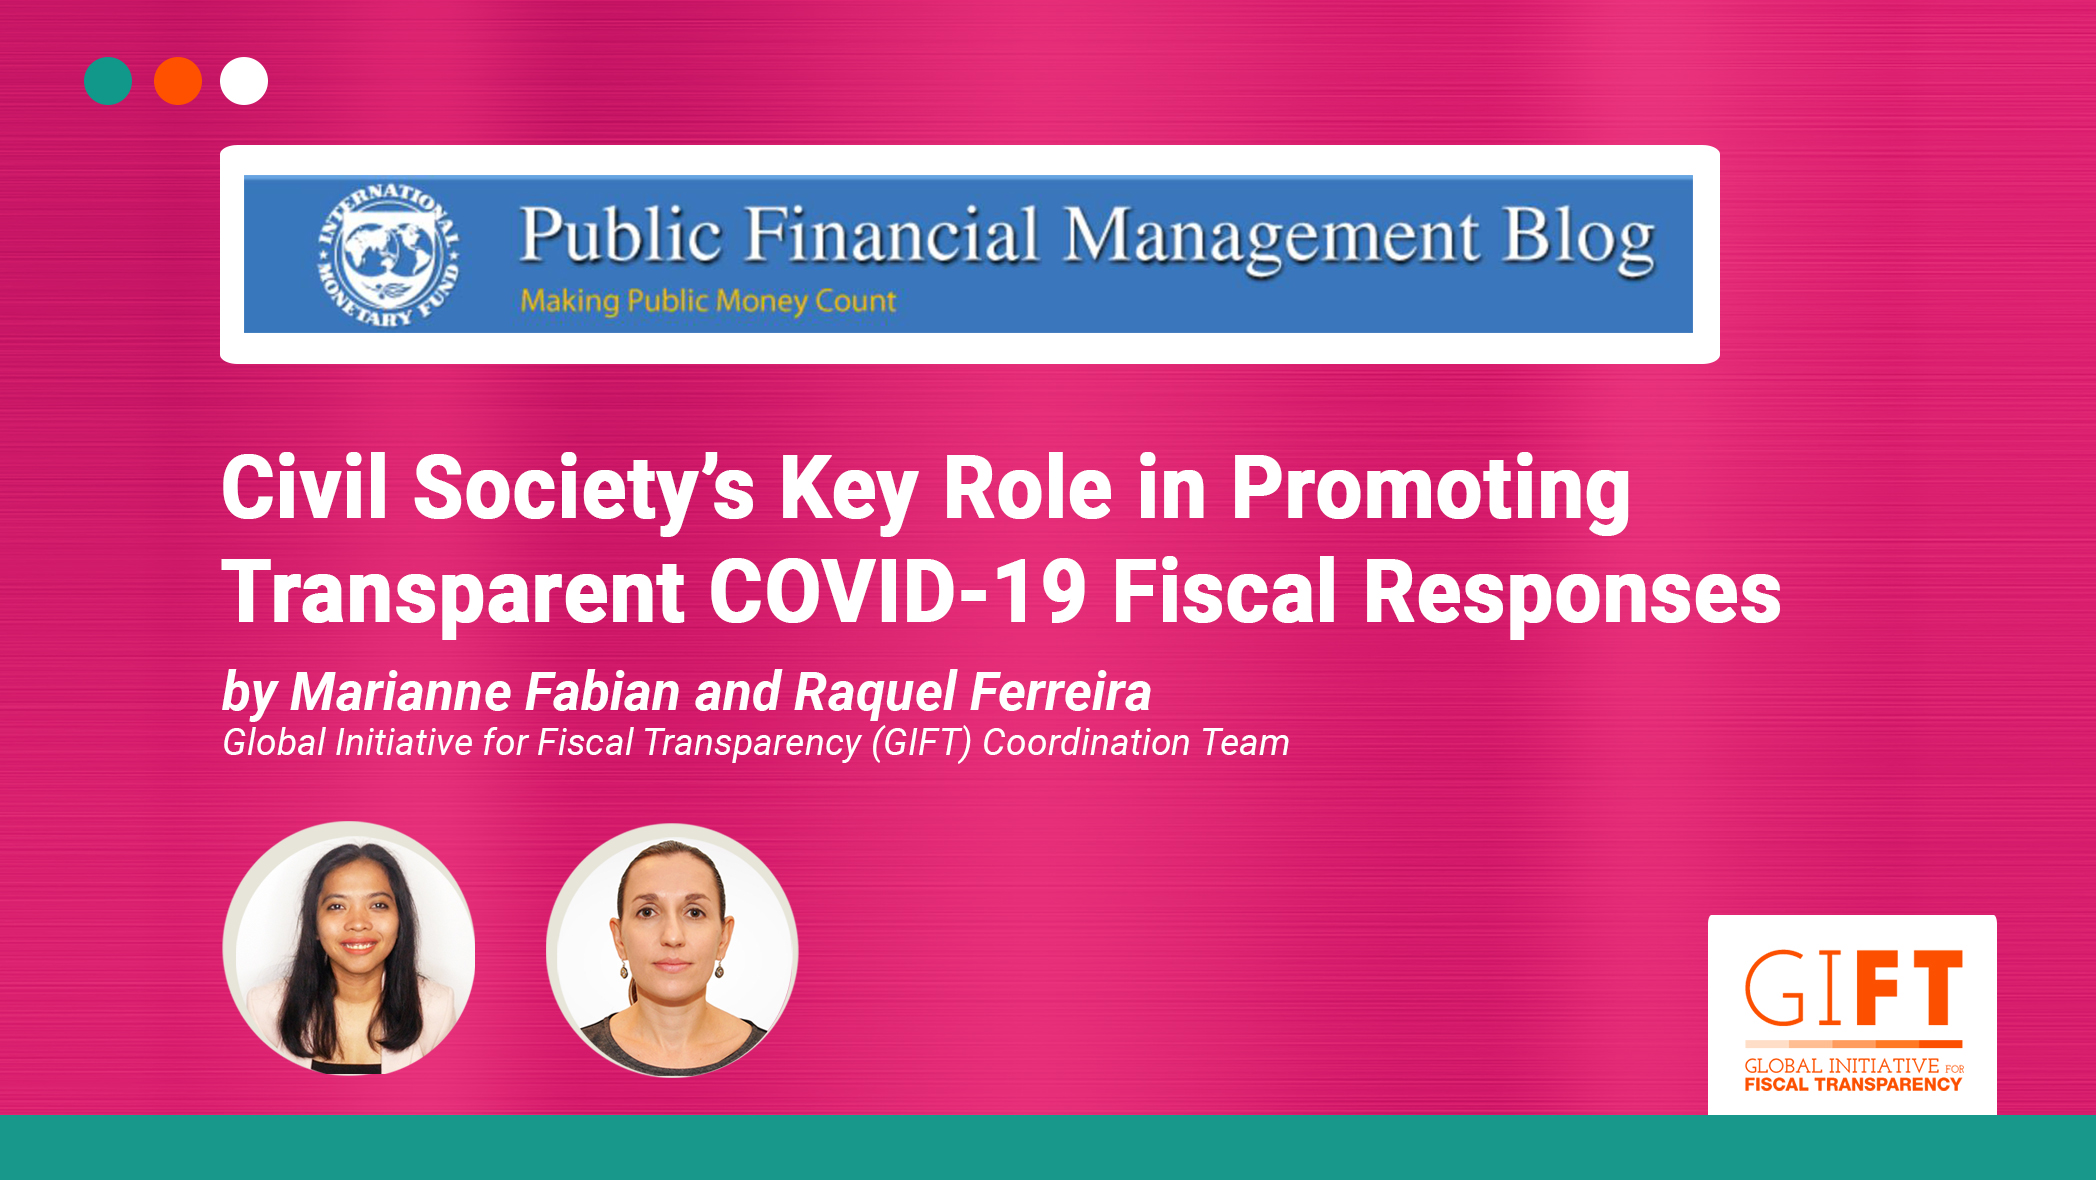 Civil Society’s Key Role in Promoting Transparent COVID-19 Fiscal Responses